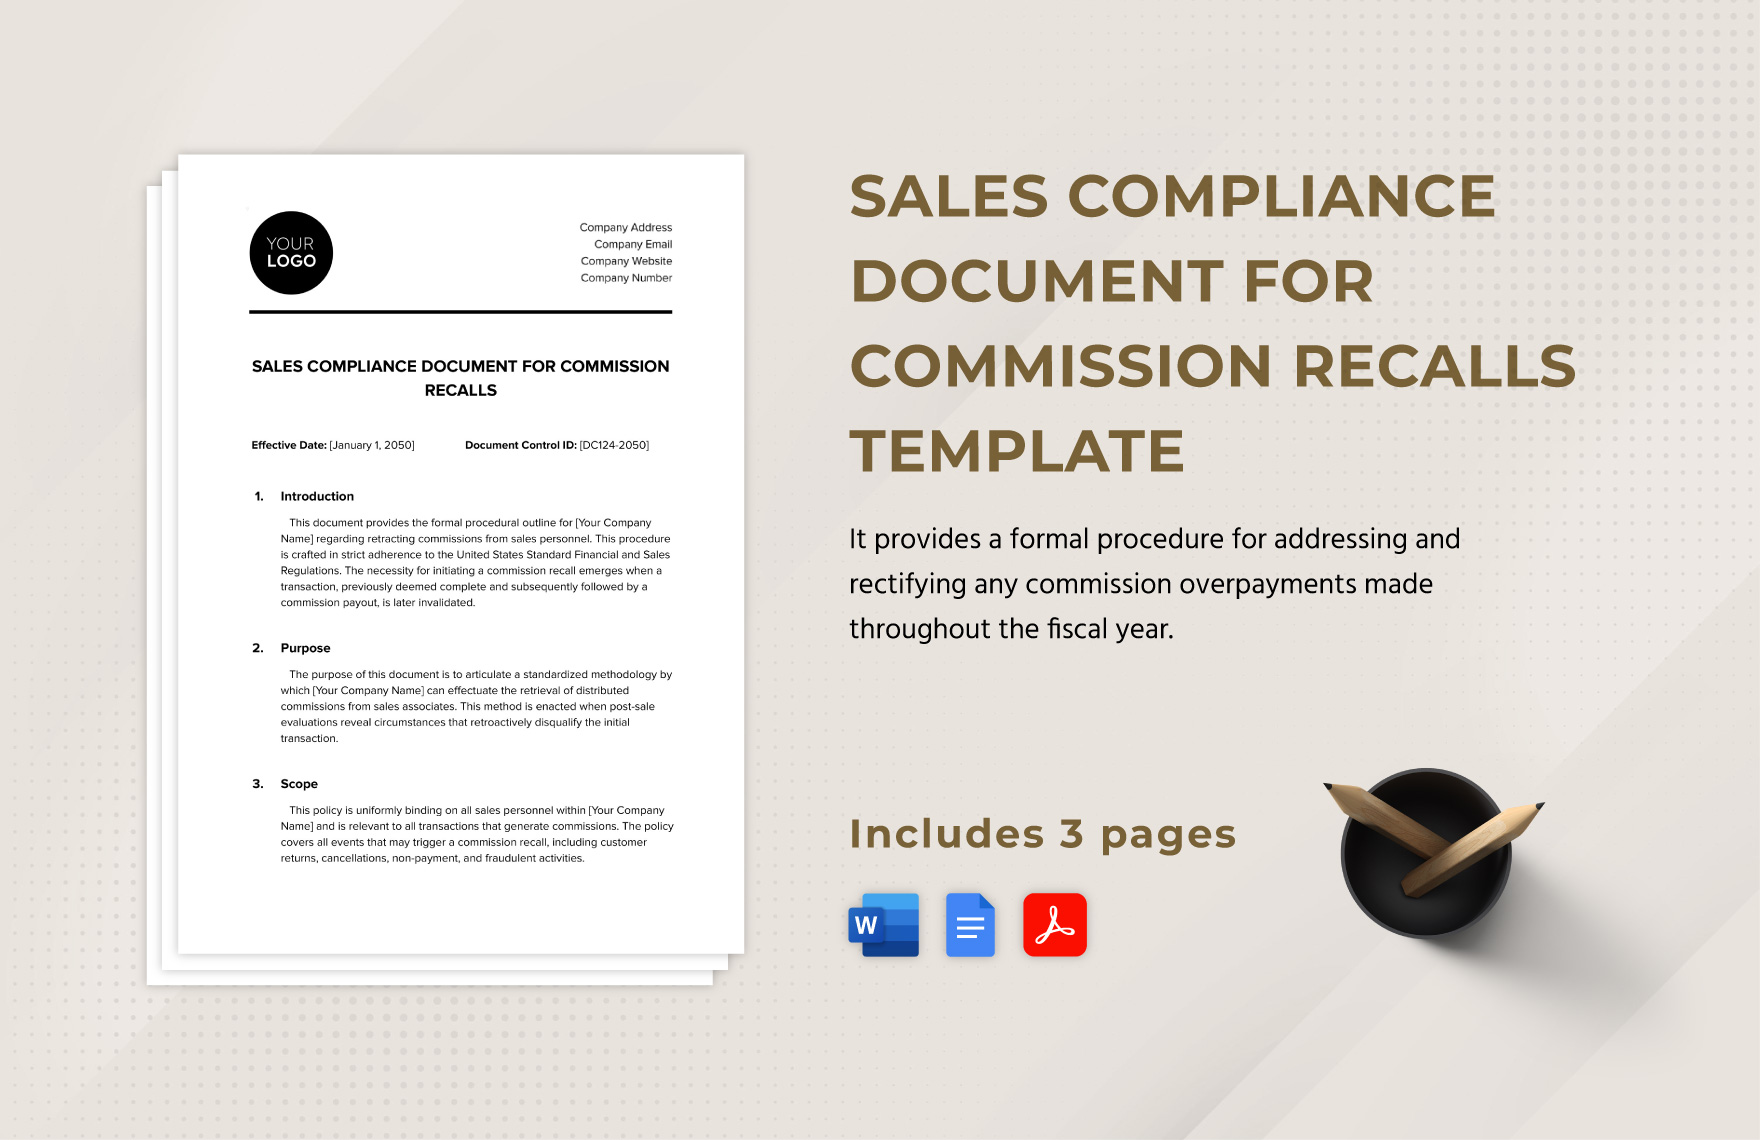 Sales Compliance Document for Commission Recalls Template in Word, Google Docs, PDF